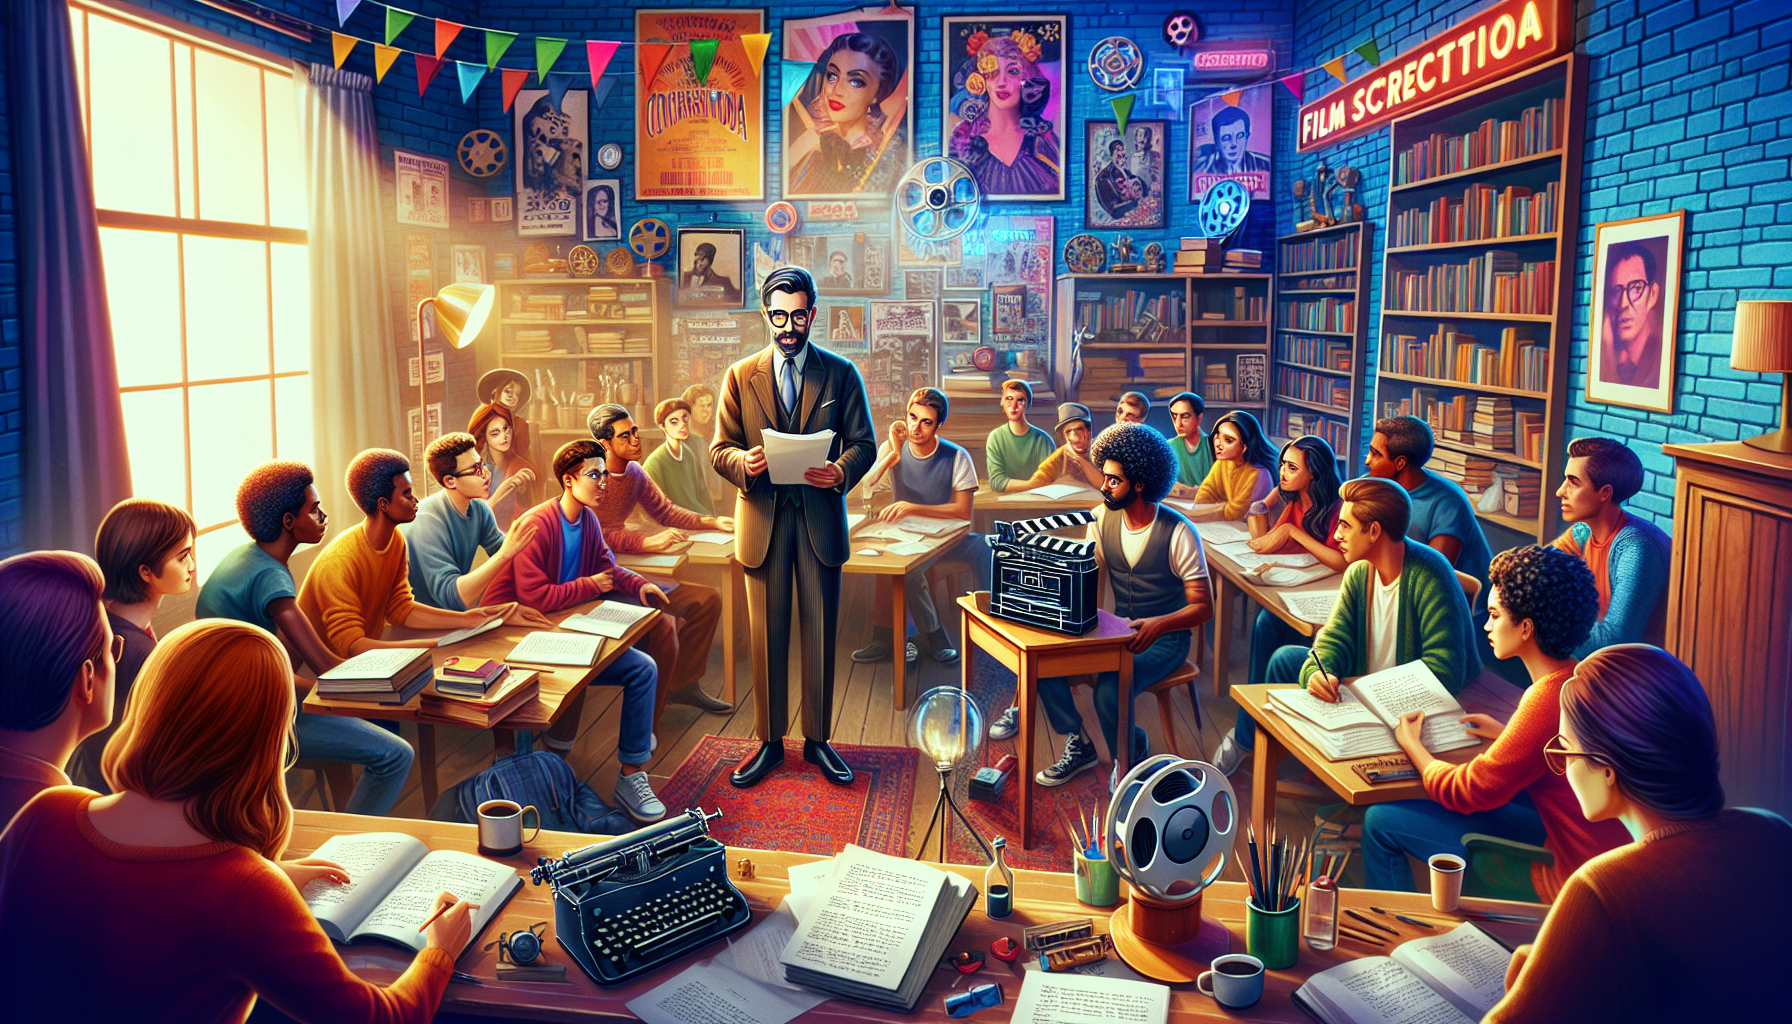 An imaginative classroom setting where Aaron Sorkin teaches a diverse group of attentive students the art of screenwriting, with scripts, movie posters, and a film projector in the background, in a cozy, well-lit room filled with books and film memorabilia.